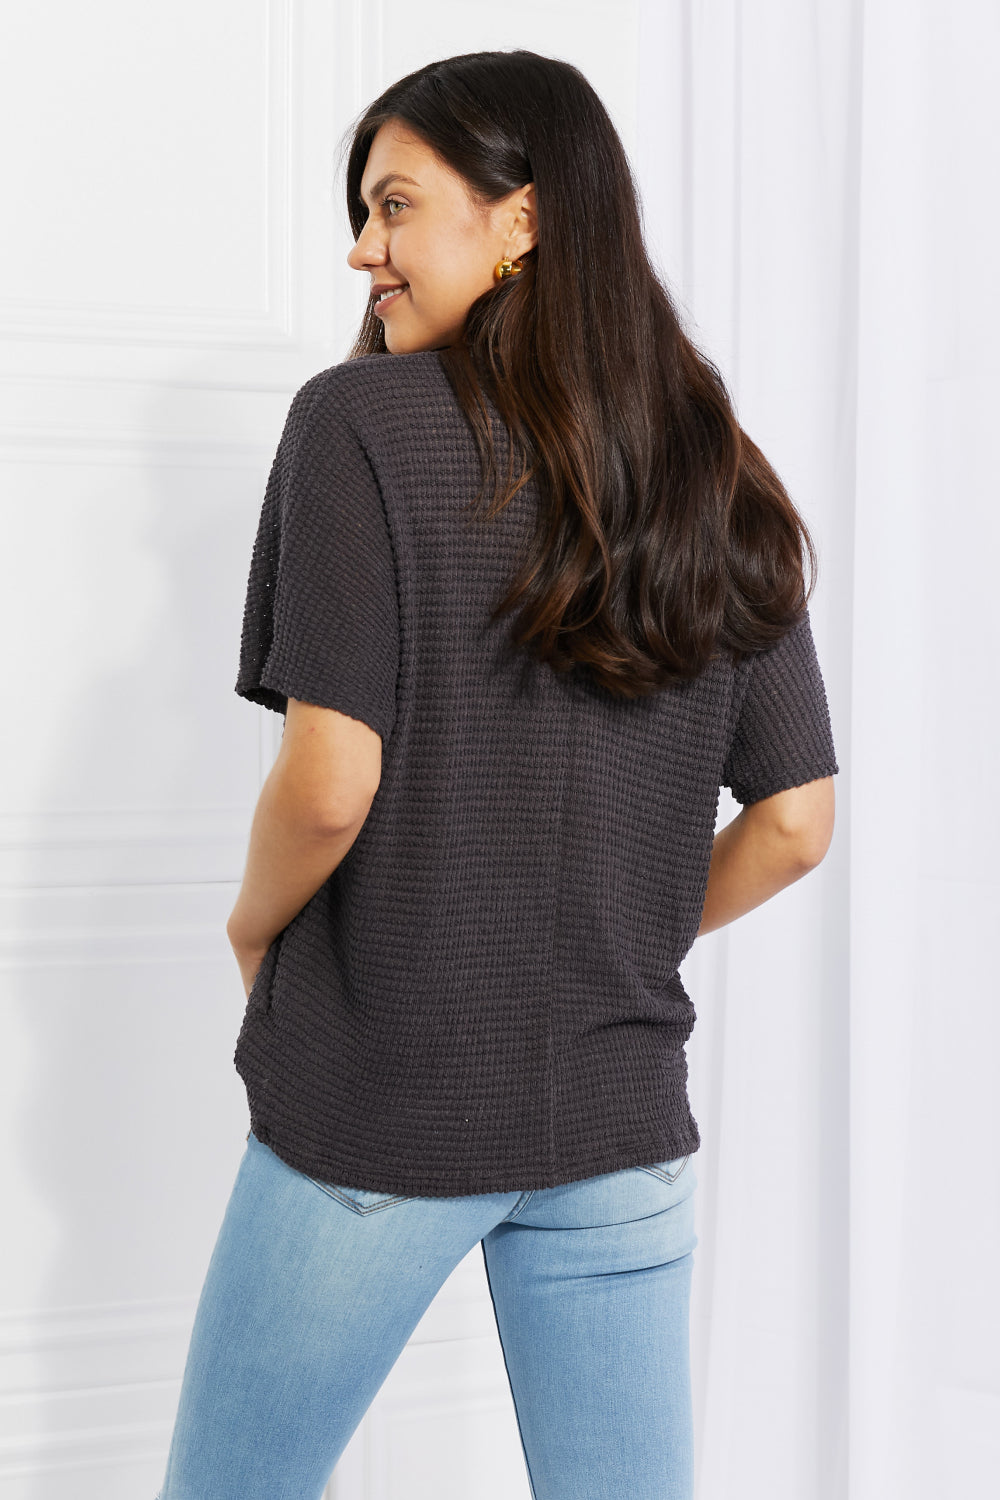 Spring It On Keyhole Jacquard Sweater in Gray